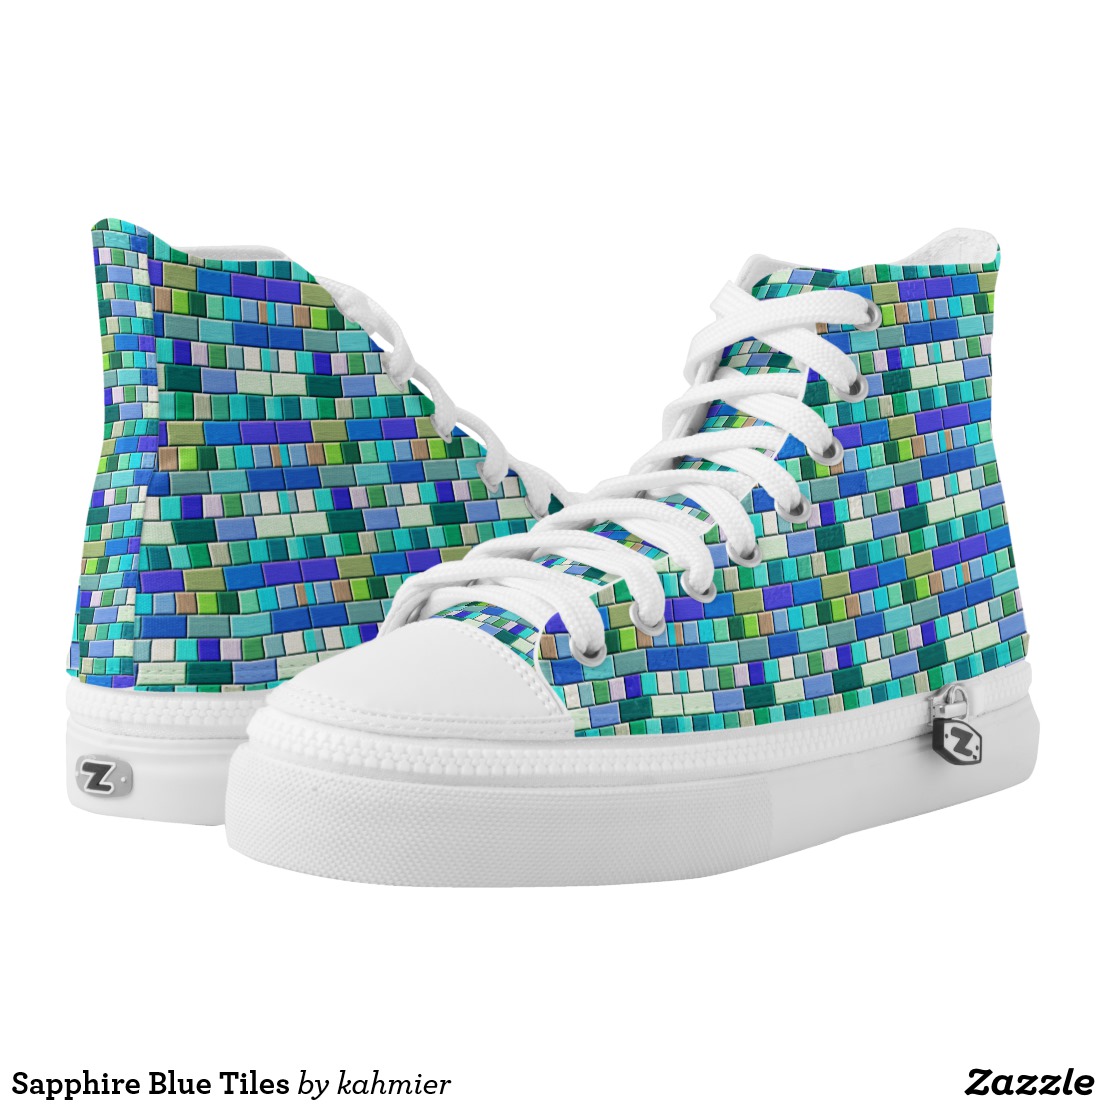 Sapphire Blue Tiles High-Top Sneakers